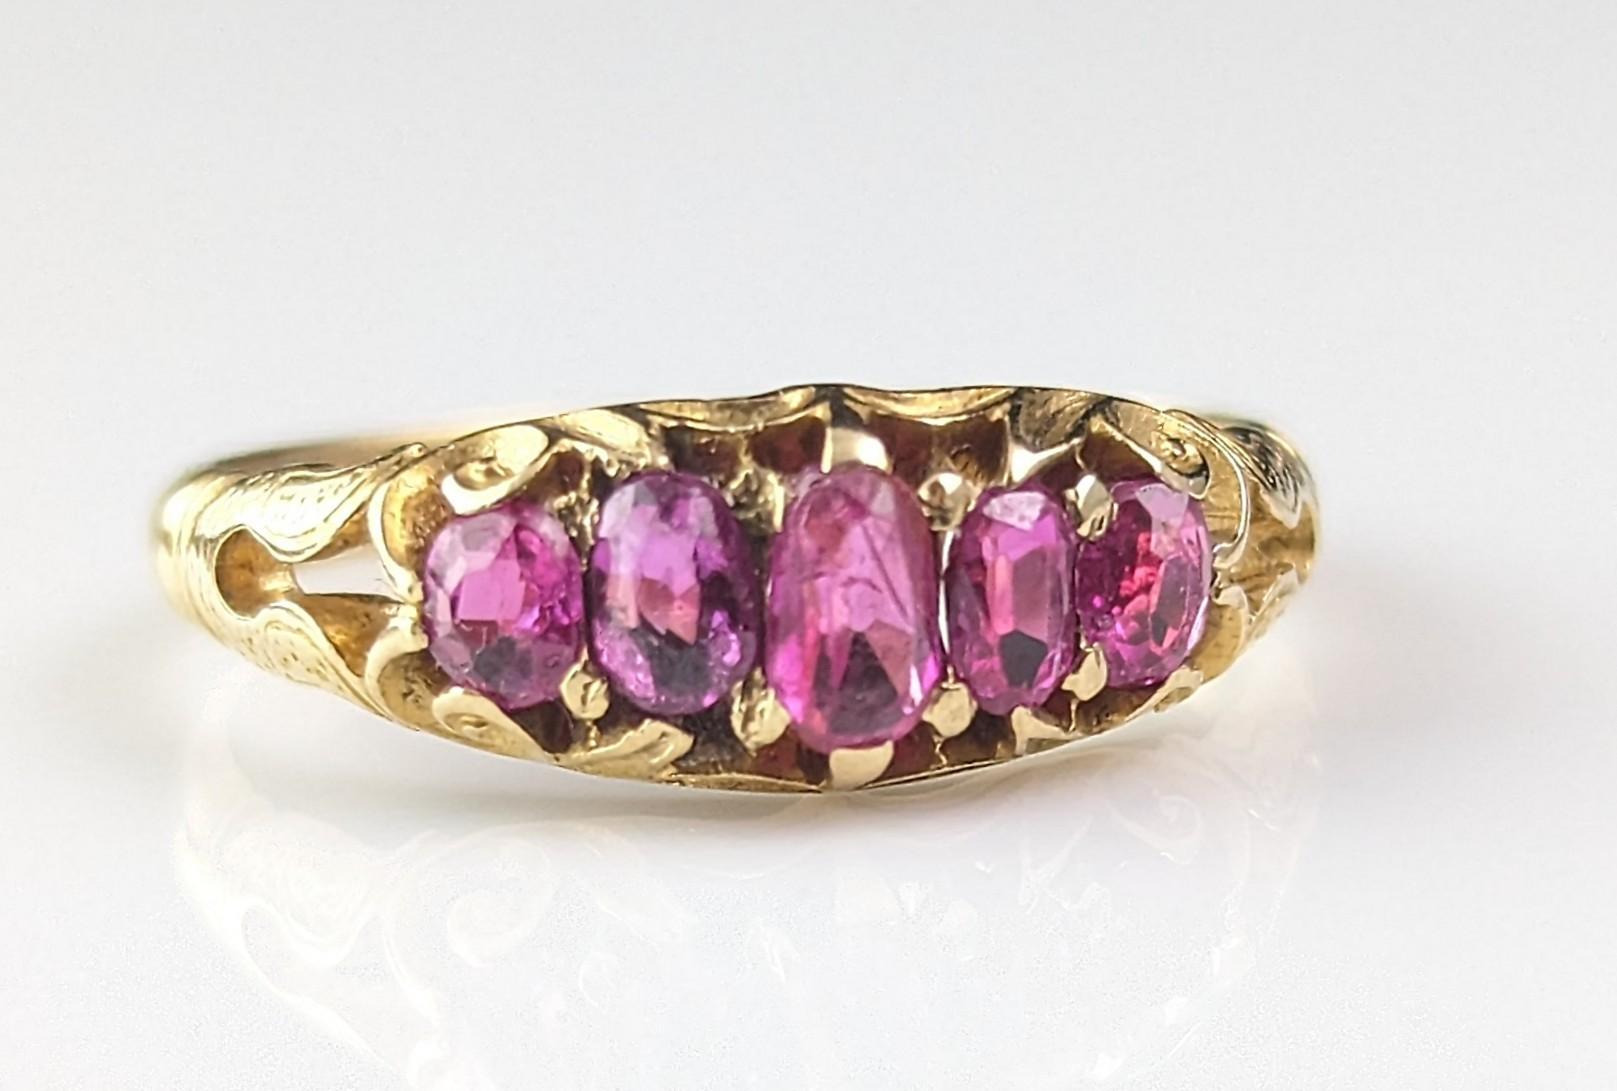 Antique Victorian five stone ruby ring, 18k yellow gold  1